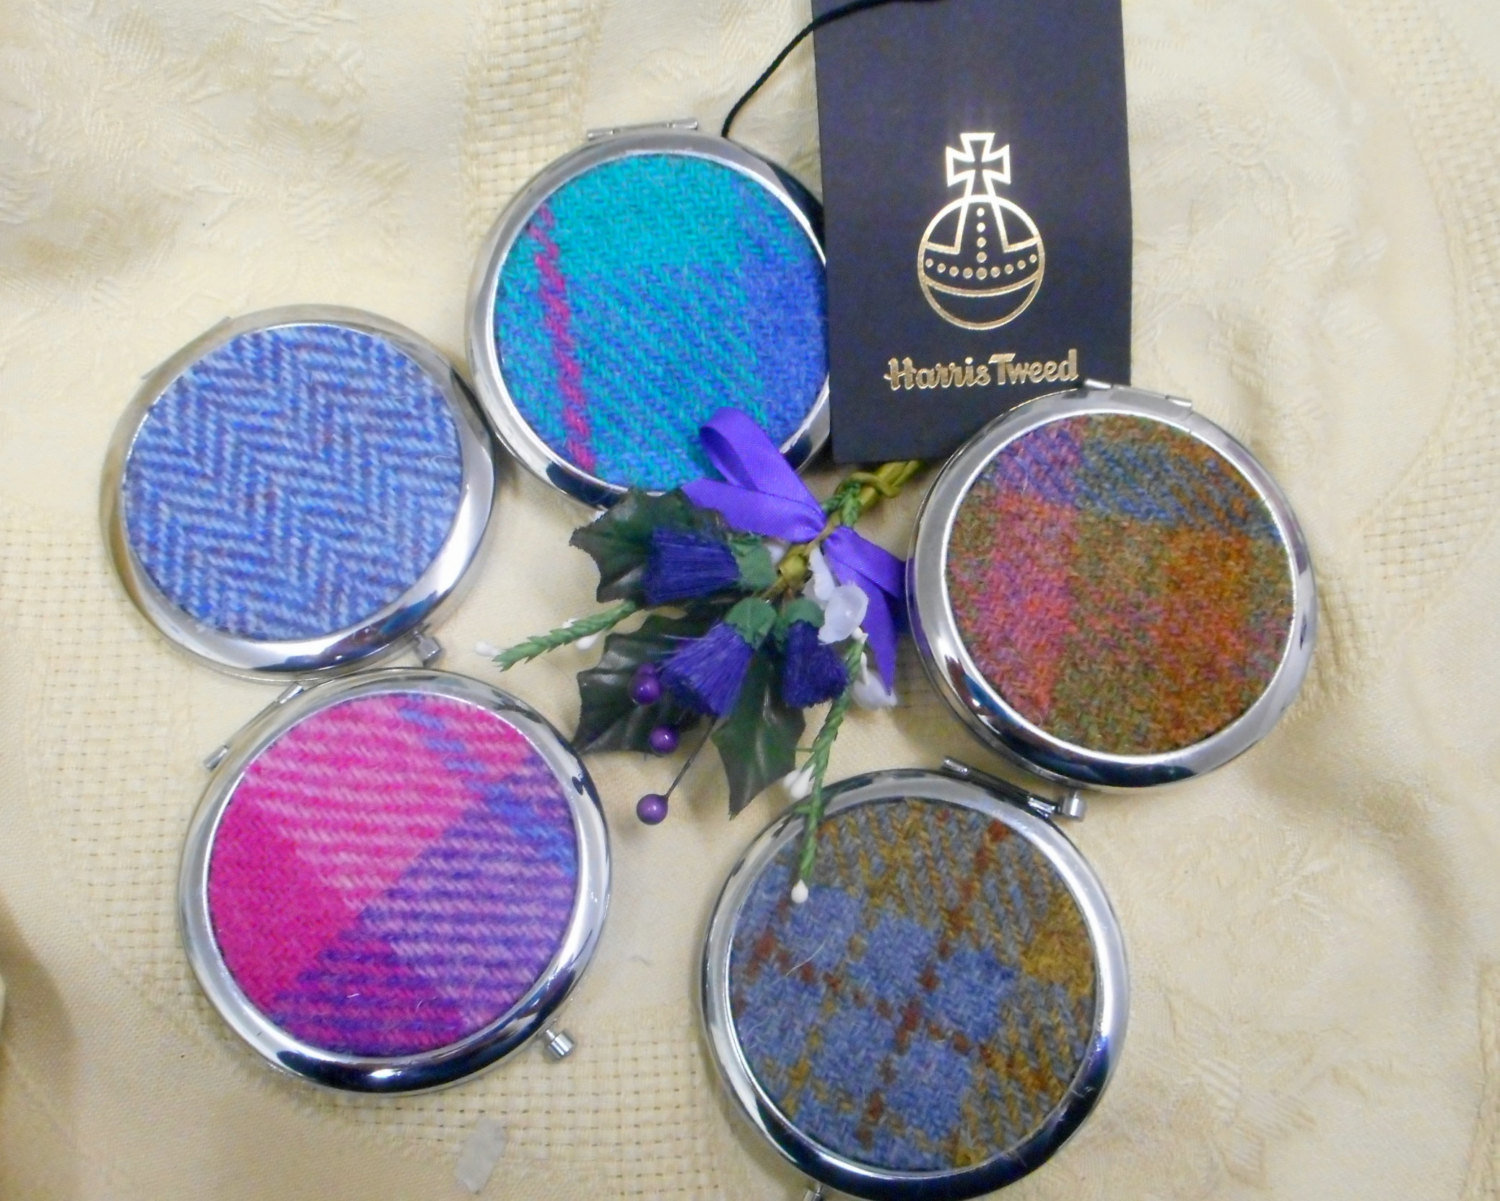 Baby blue plaid Harris Tweed compact mirror  womens gift for Mother, sister, best friend, handbag or pocket accessory, made in Scotland UK